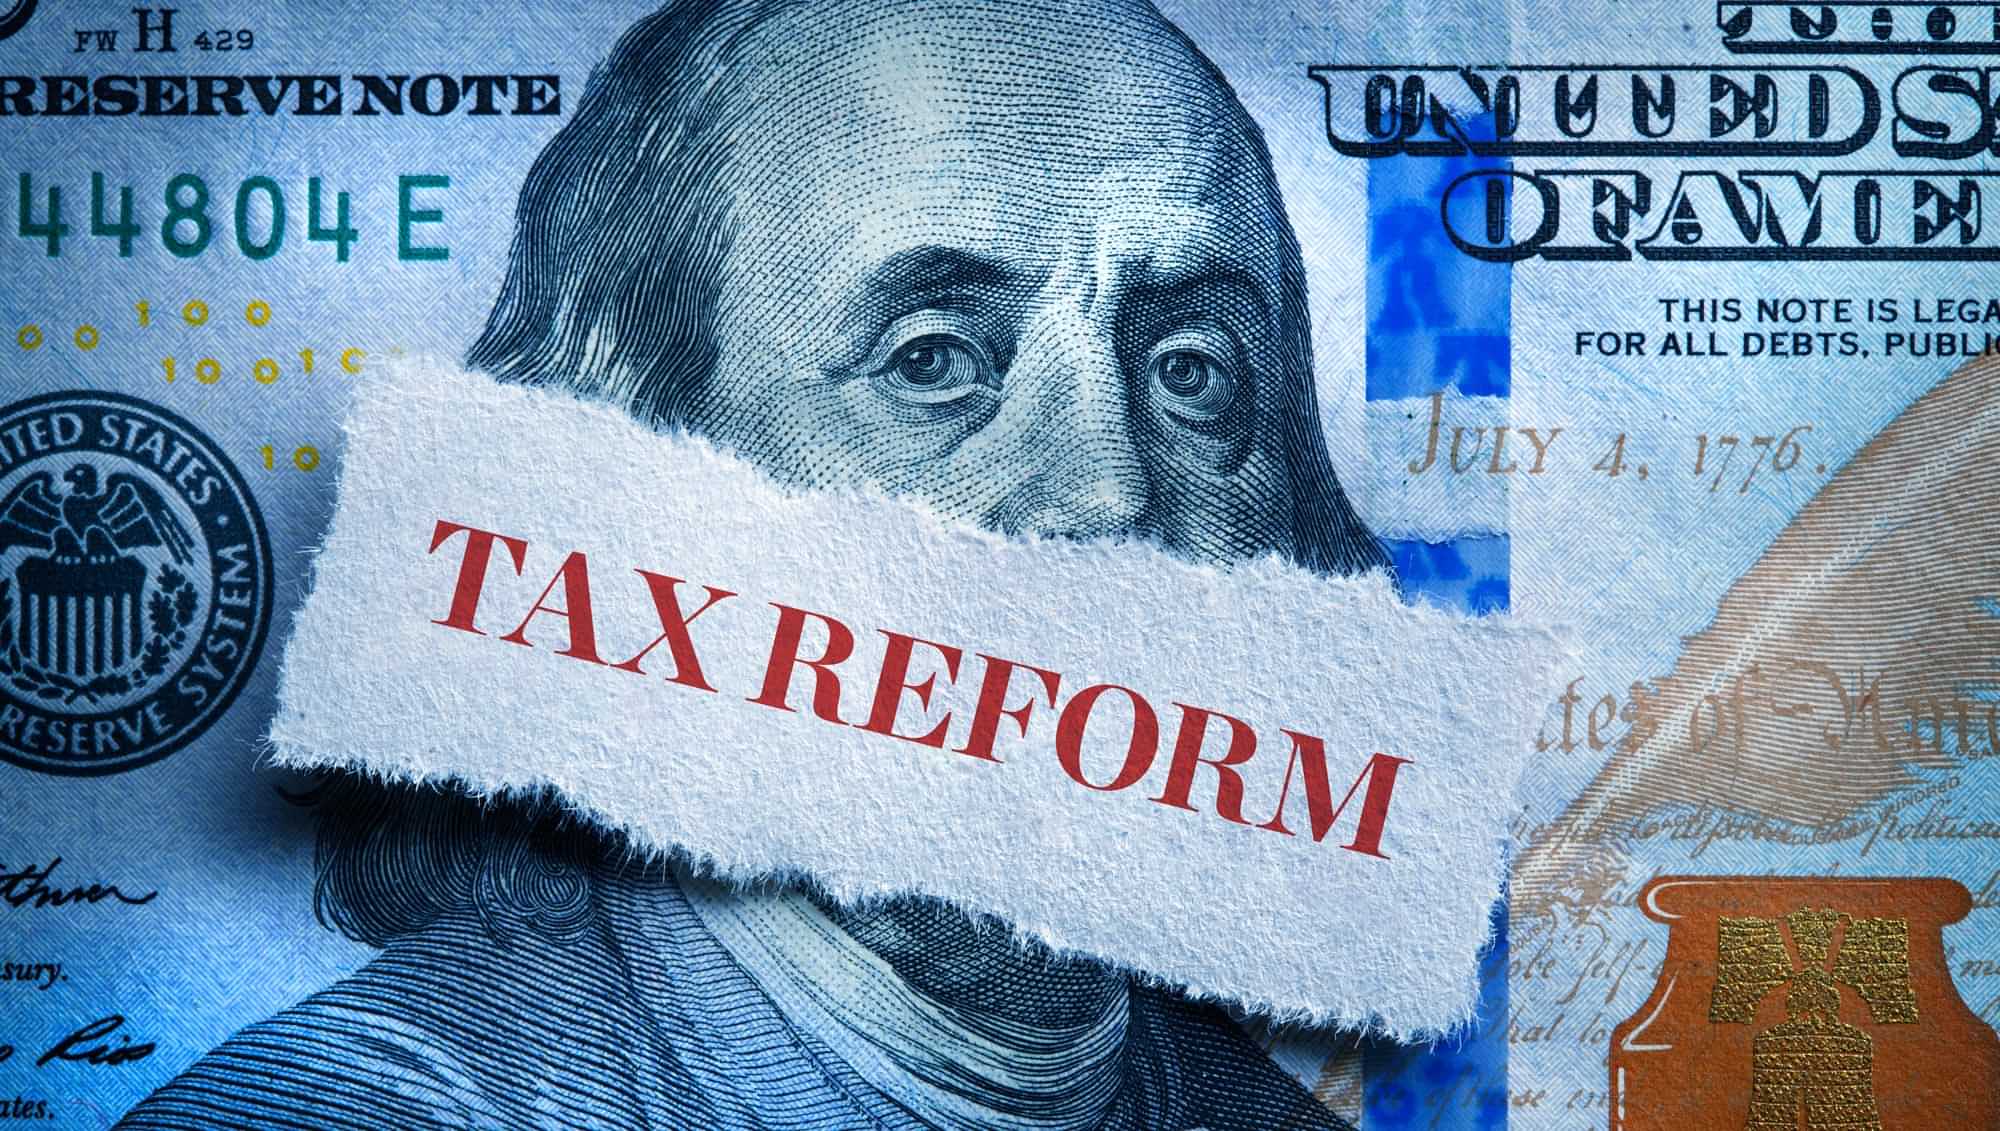 Tax Reform typography over a close up of Benjamin Franklin on a 100 dollar bill